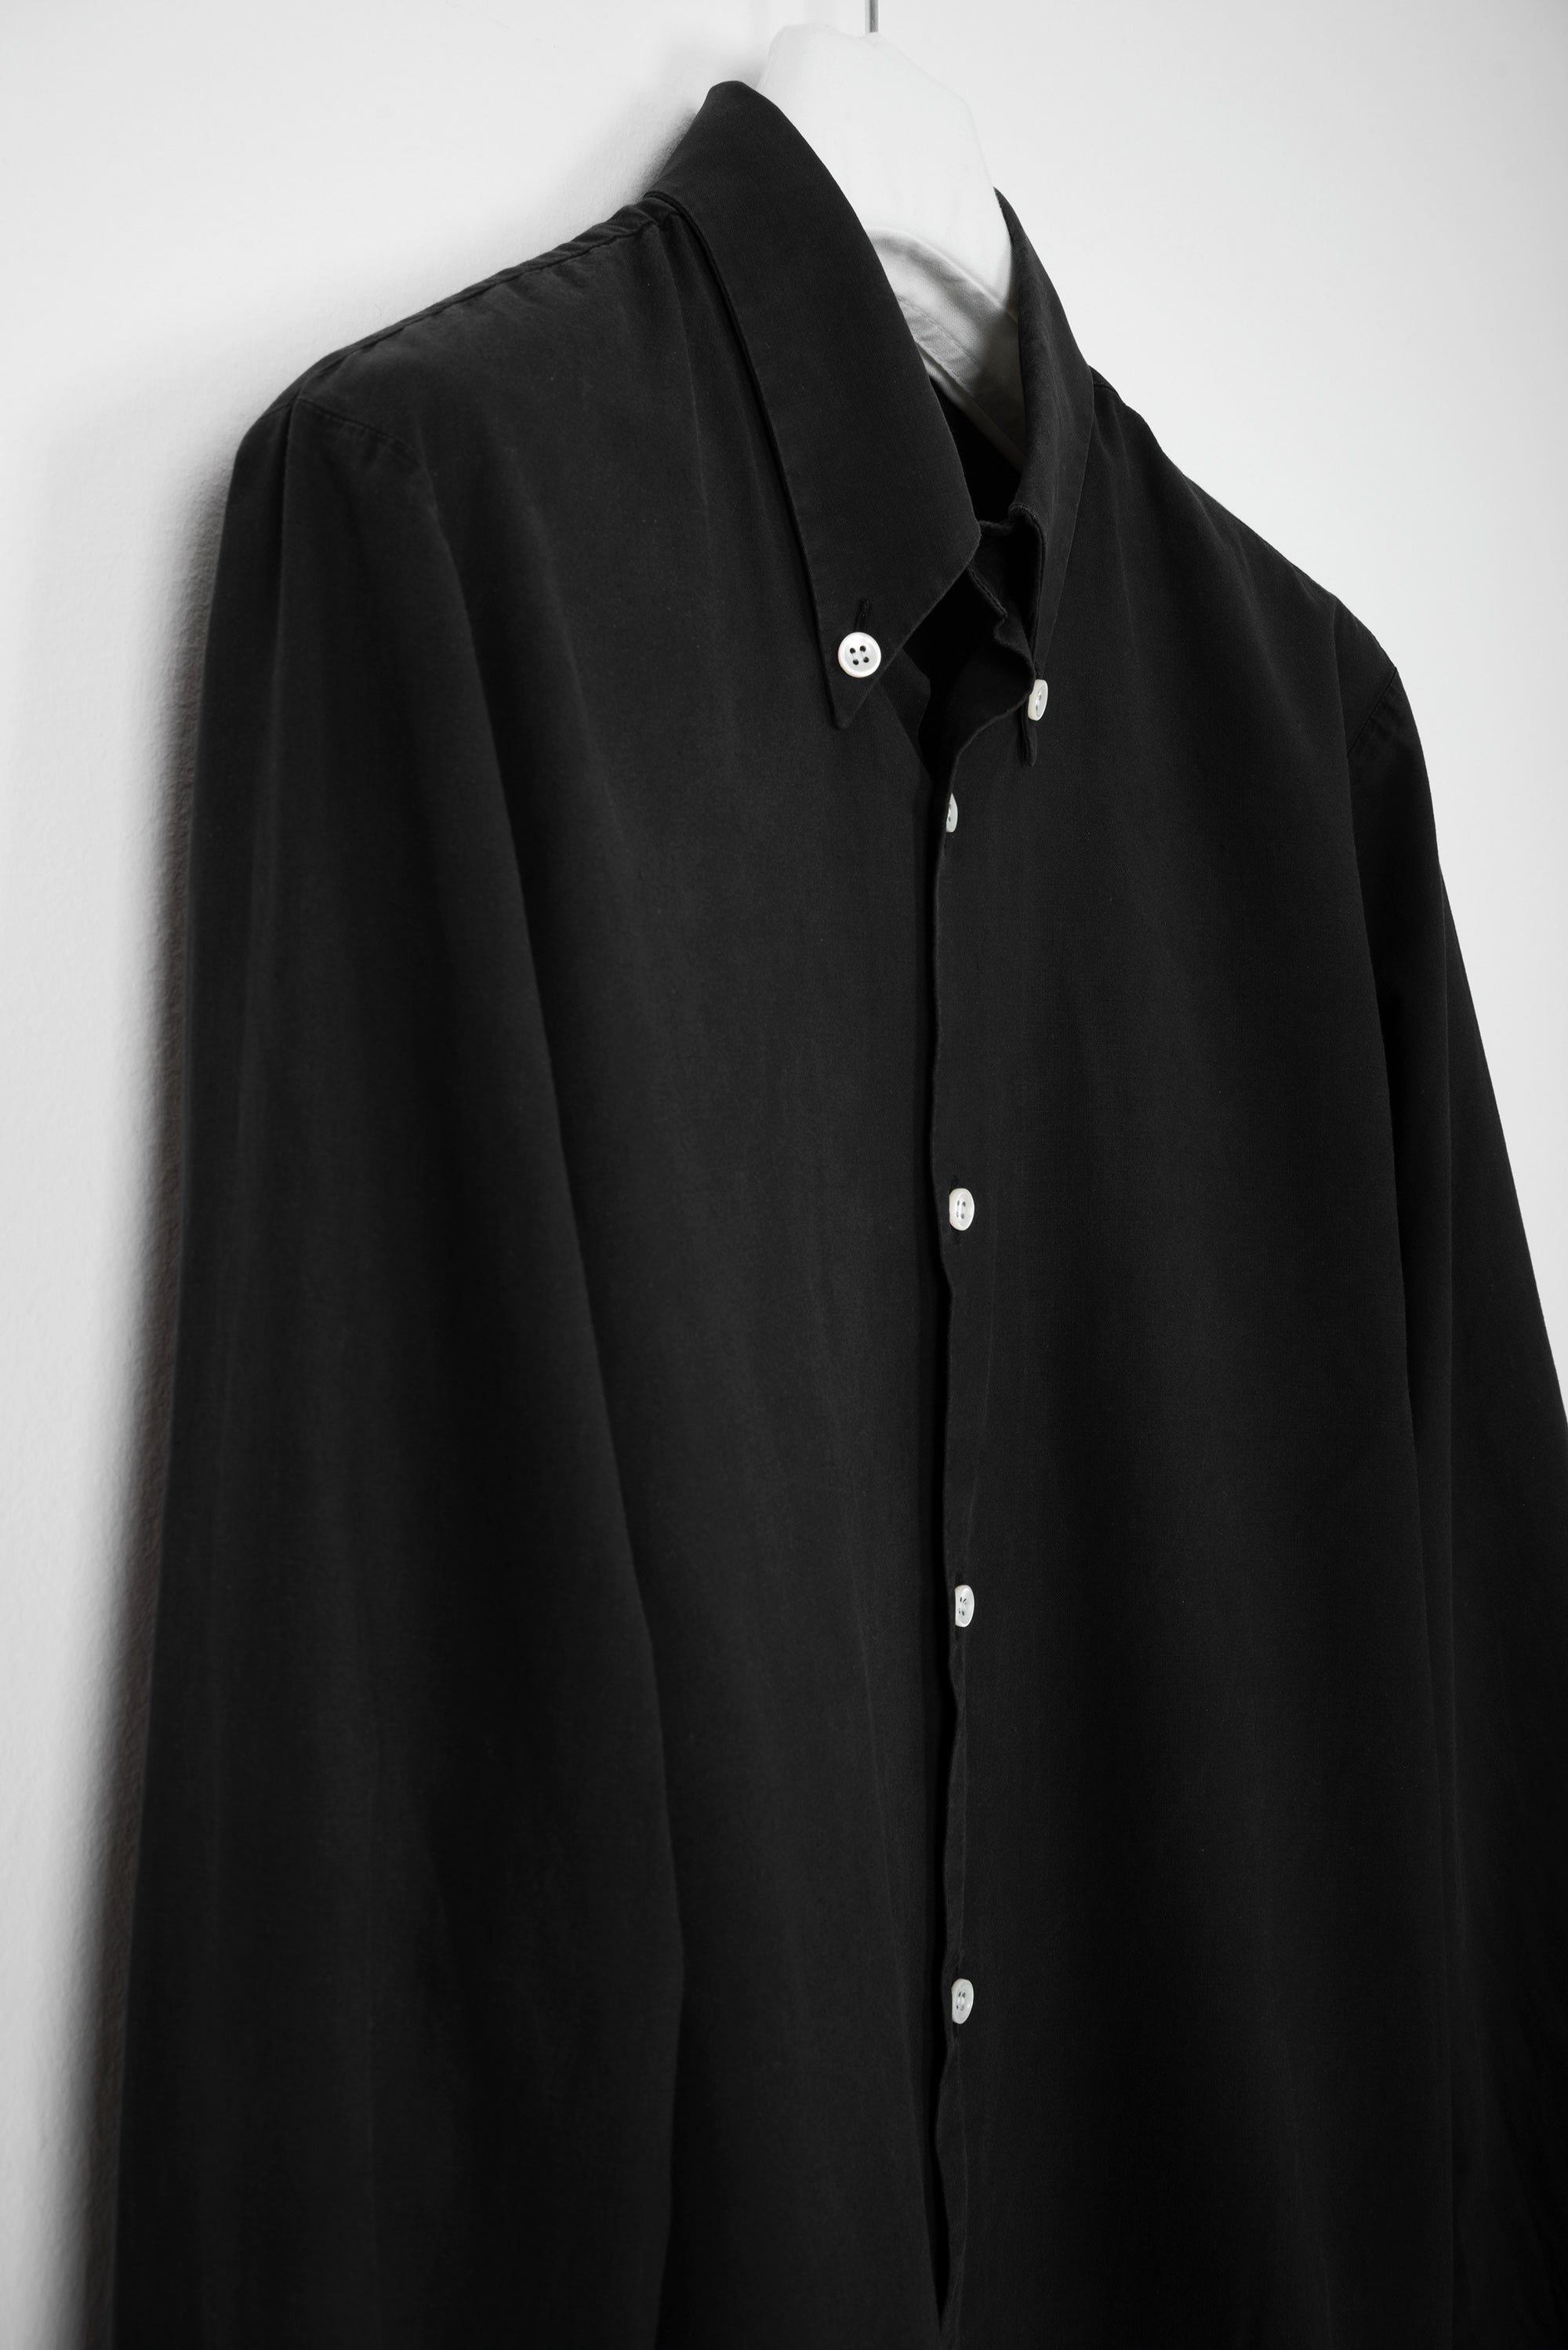 1999 S/S BLACK BUTTON-DOWN SHIRT IN BRUSHED COTTON